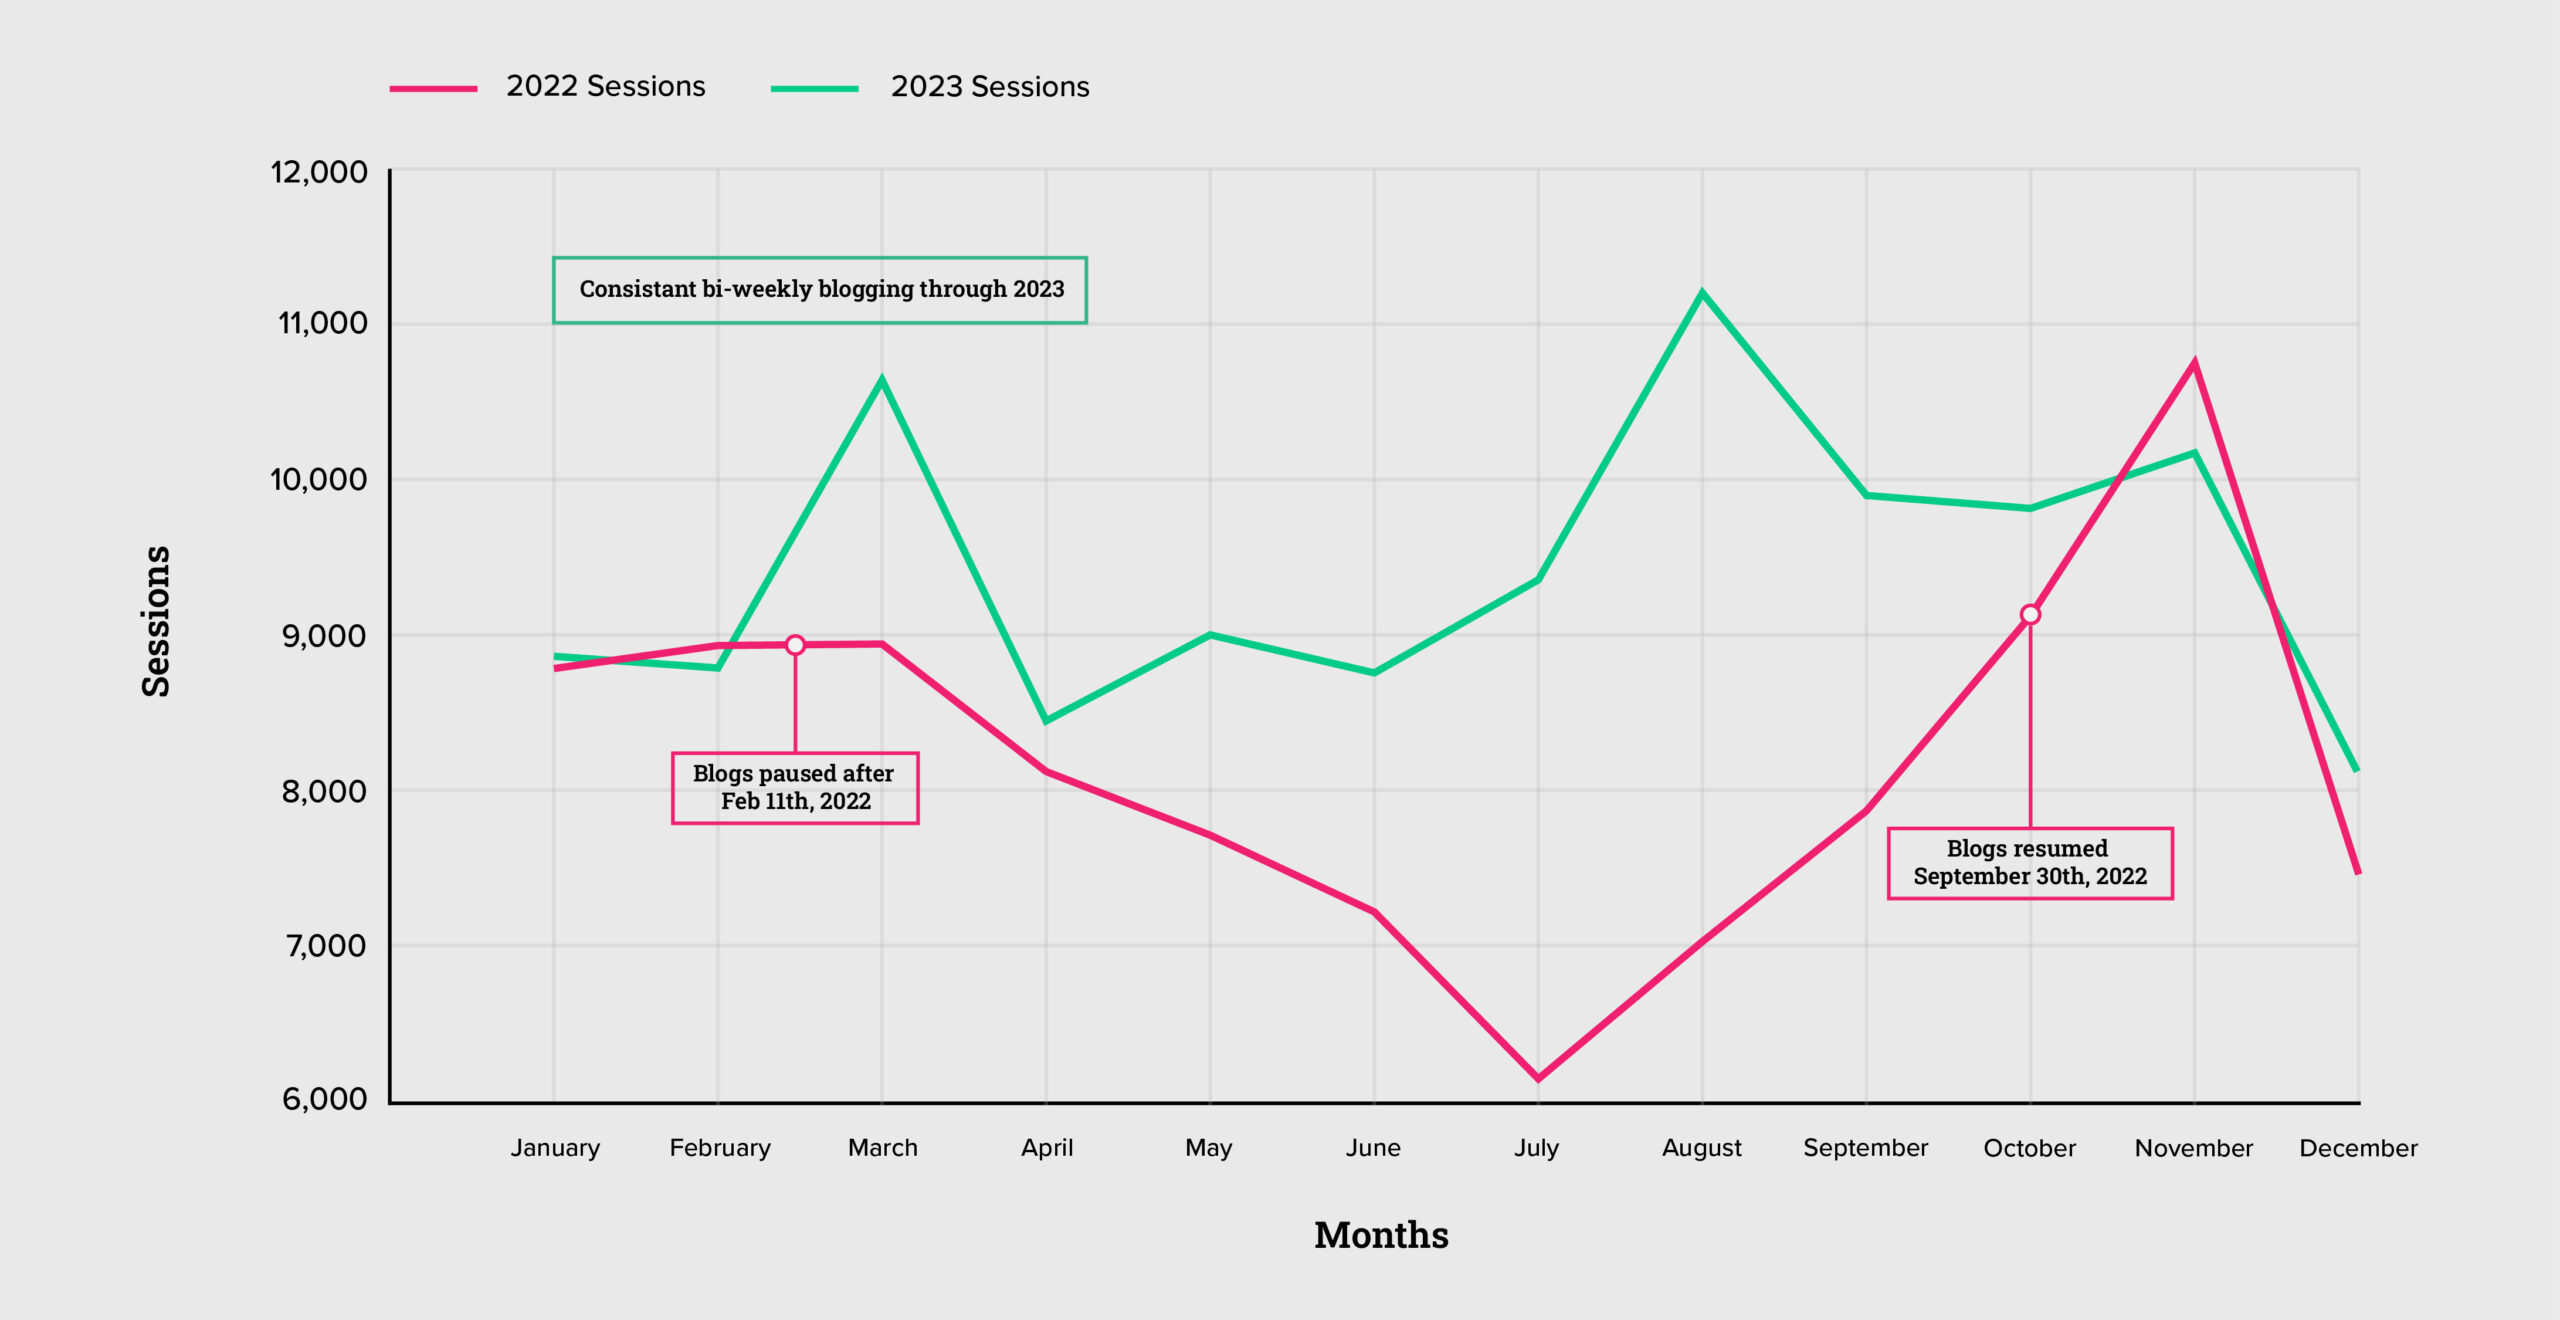 Time series chart comparing 2022 sessions to 2023 sessions.